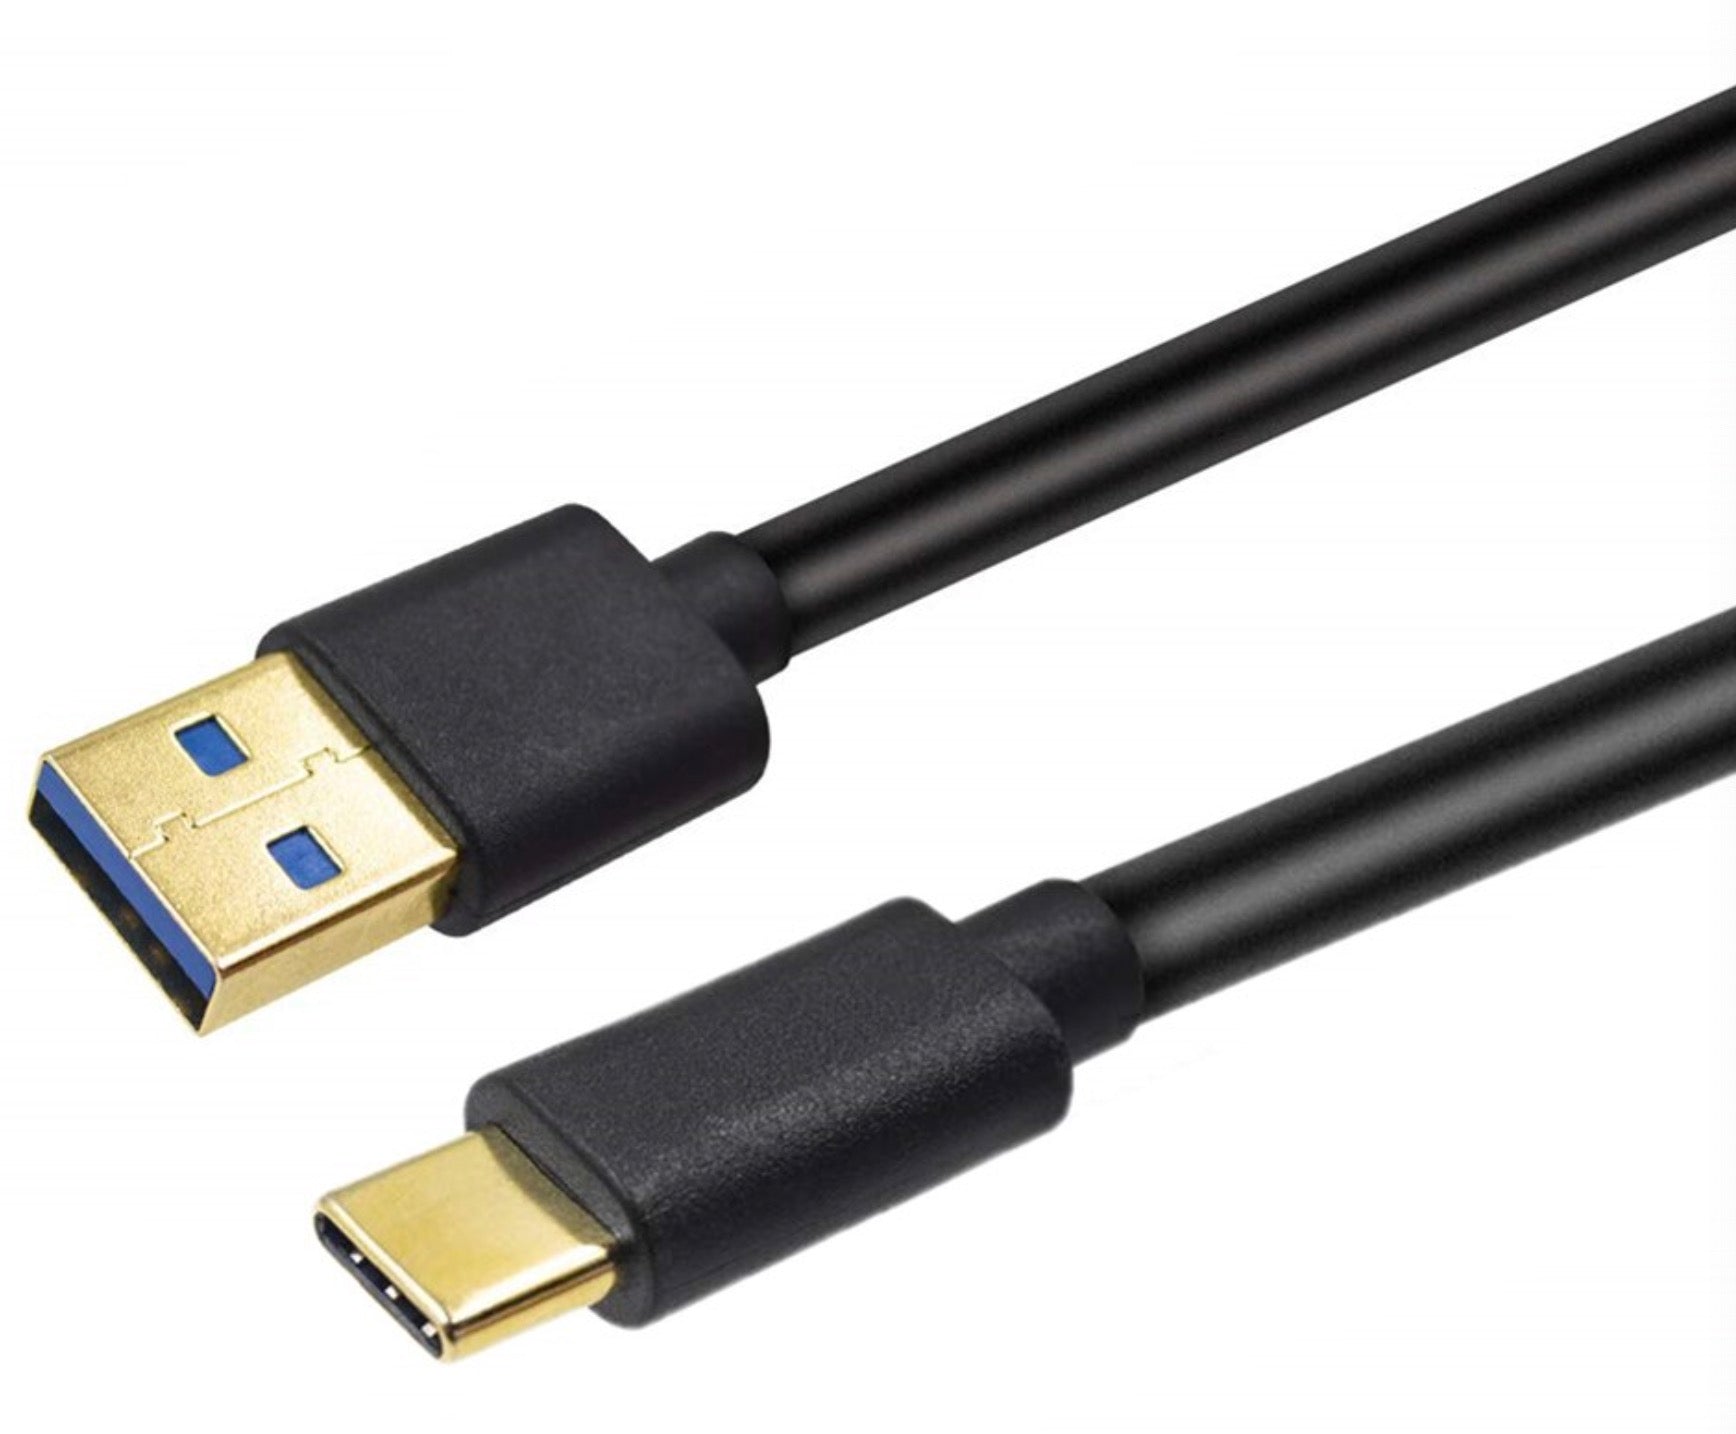 USB-C Type-C to USB 3.0 Type A Charging Data Cable